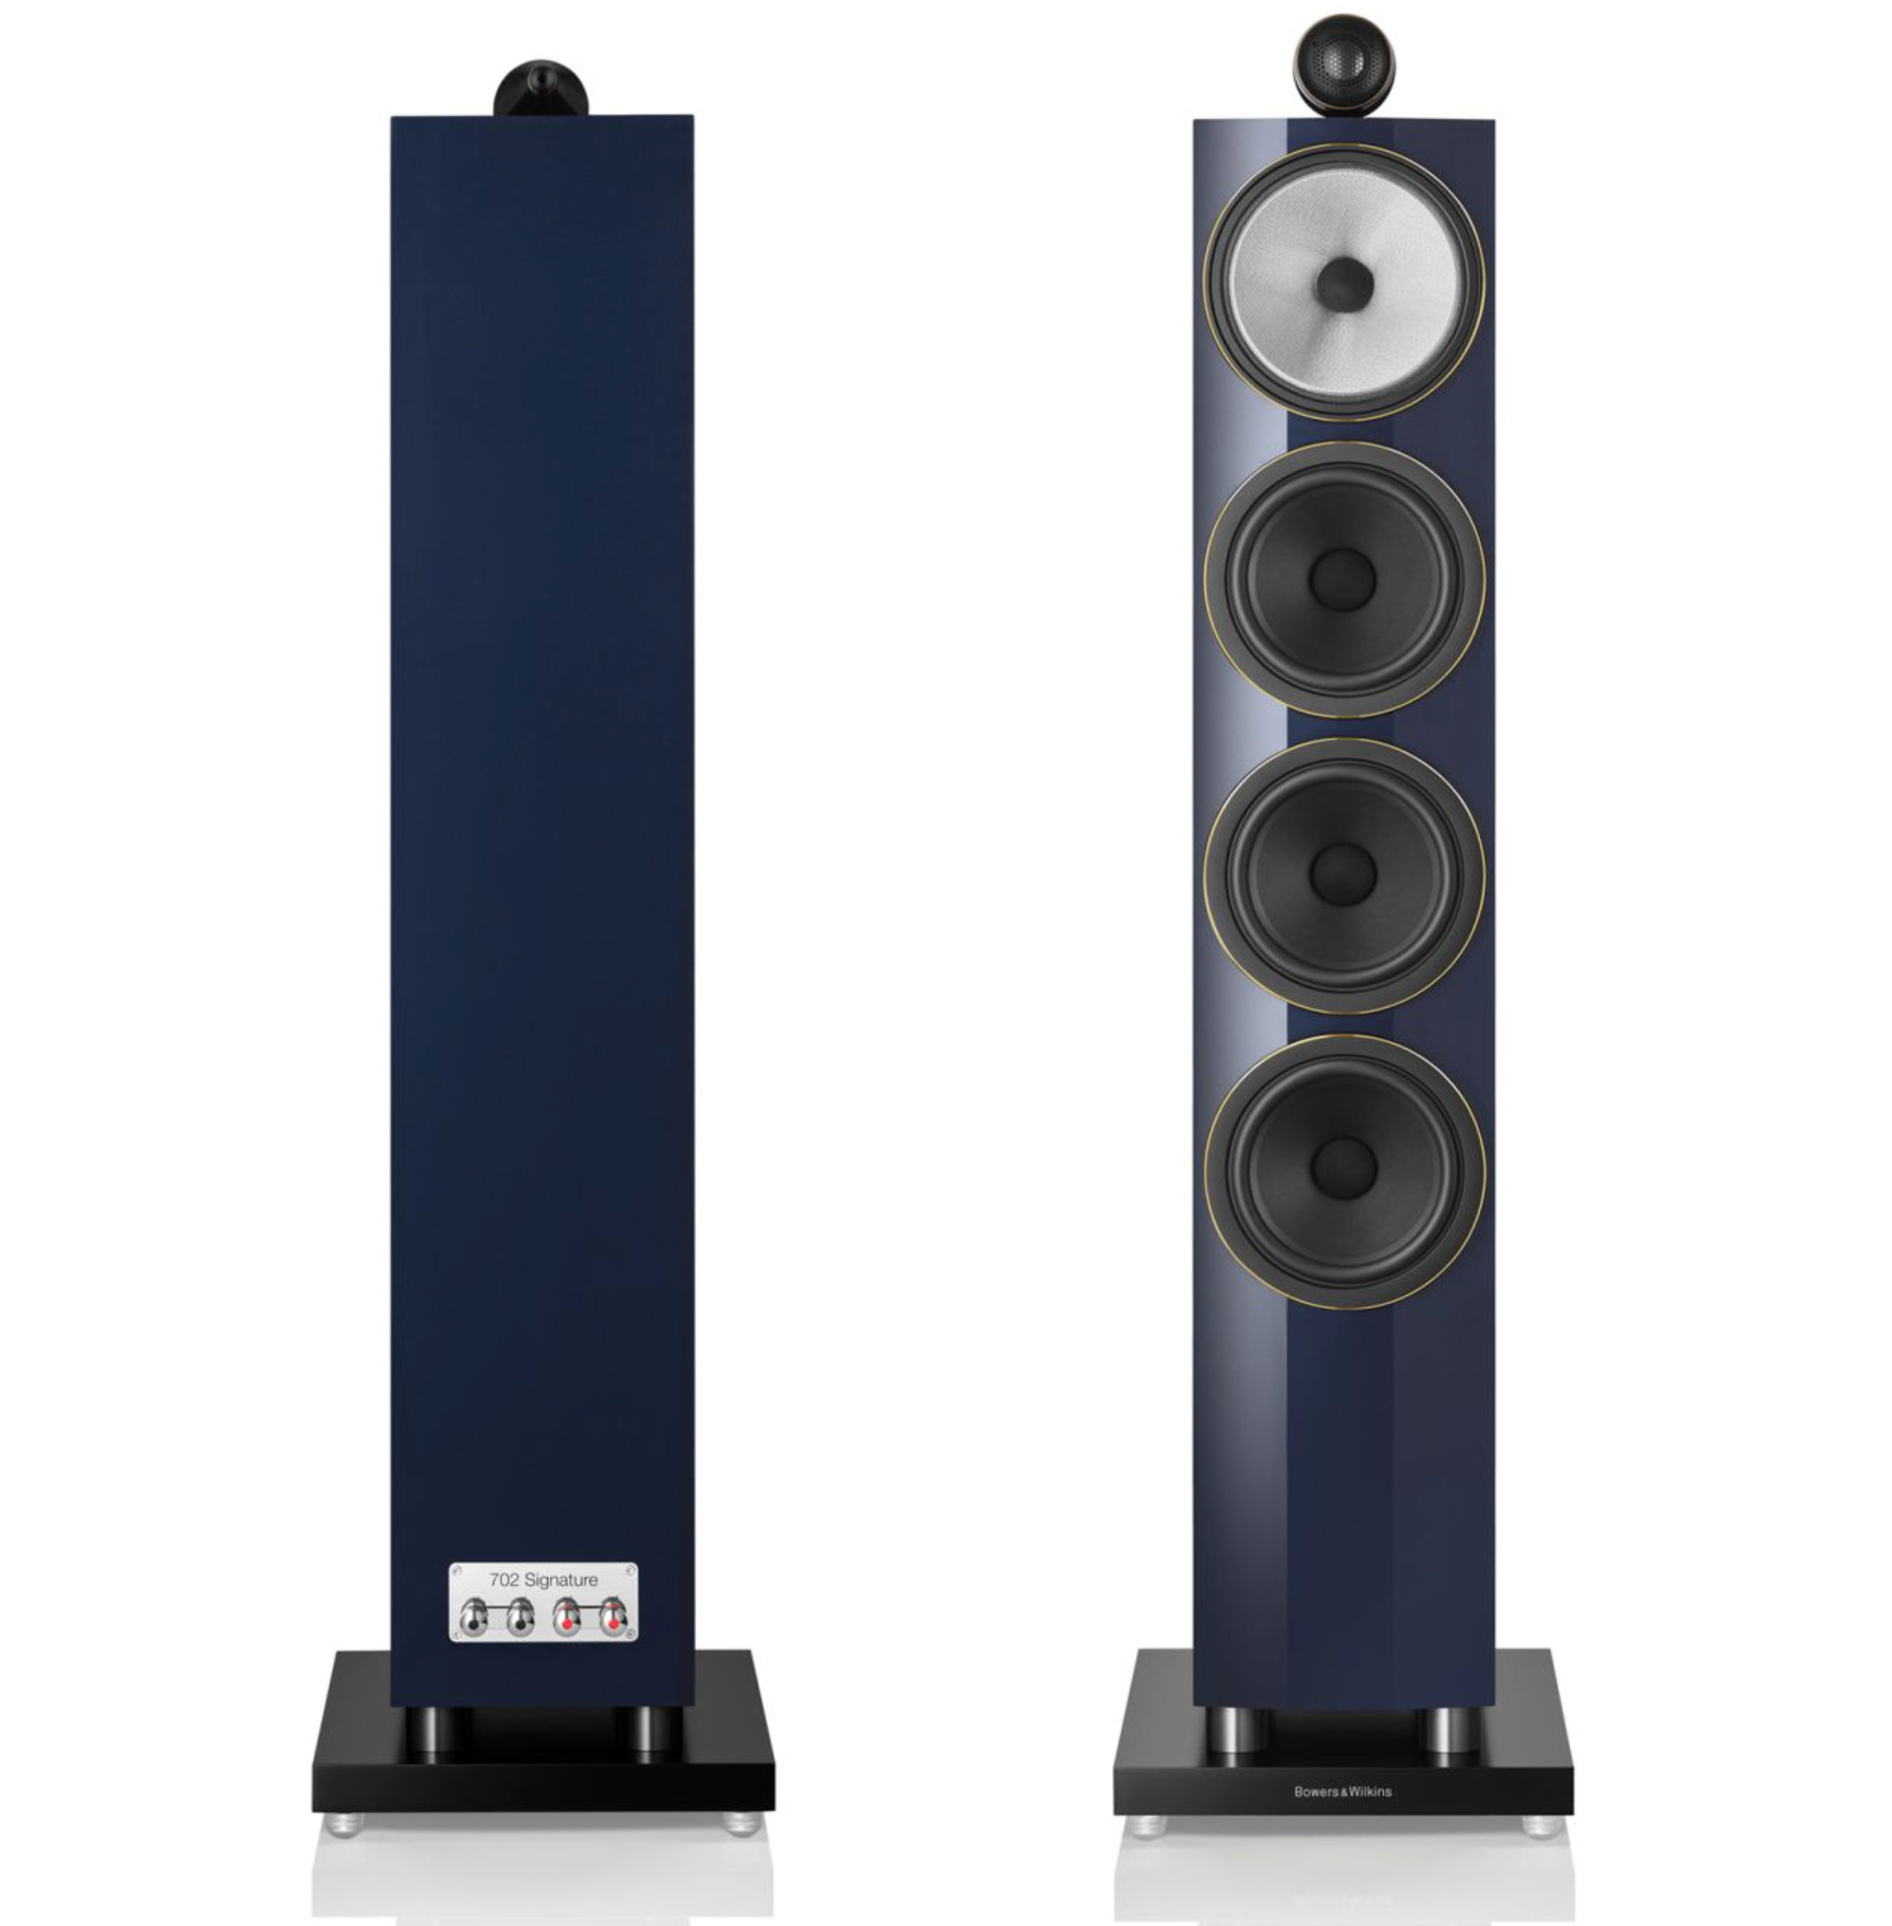 Bowers & Wilkins 702 S3 Signature Floorstanders in Midnight Blue Metallic.  Image shows back and front of speakers